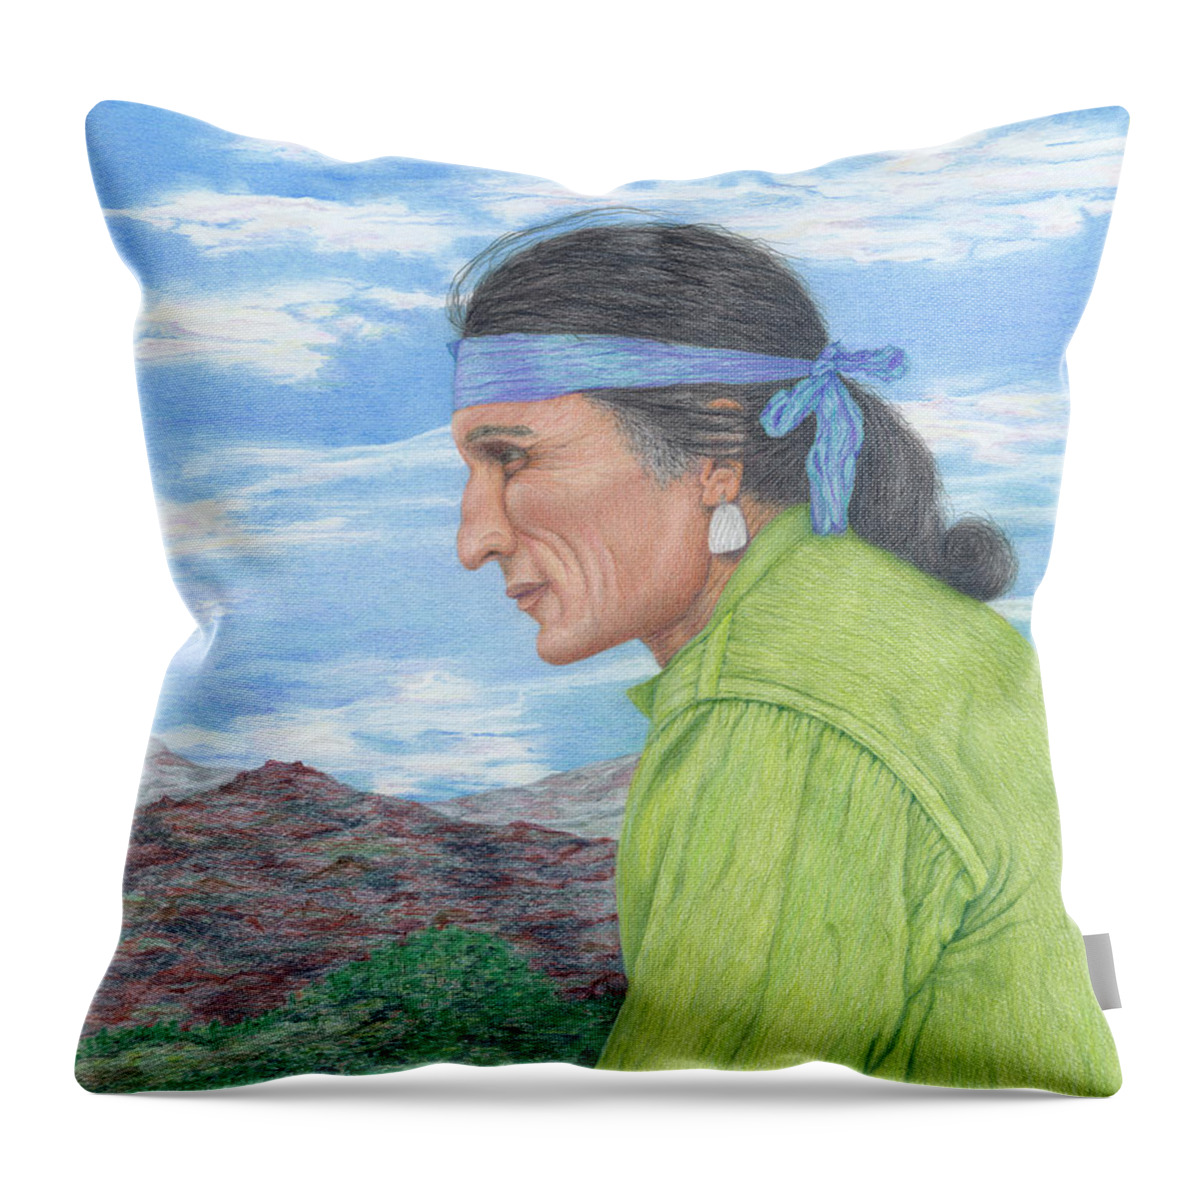 Colored Pencil Throw Pillow featuring the drawing Part Earth, Part Heaven by Diana Hrabosky